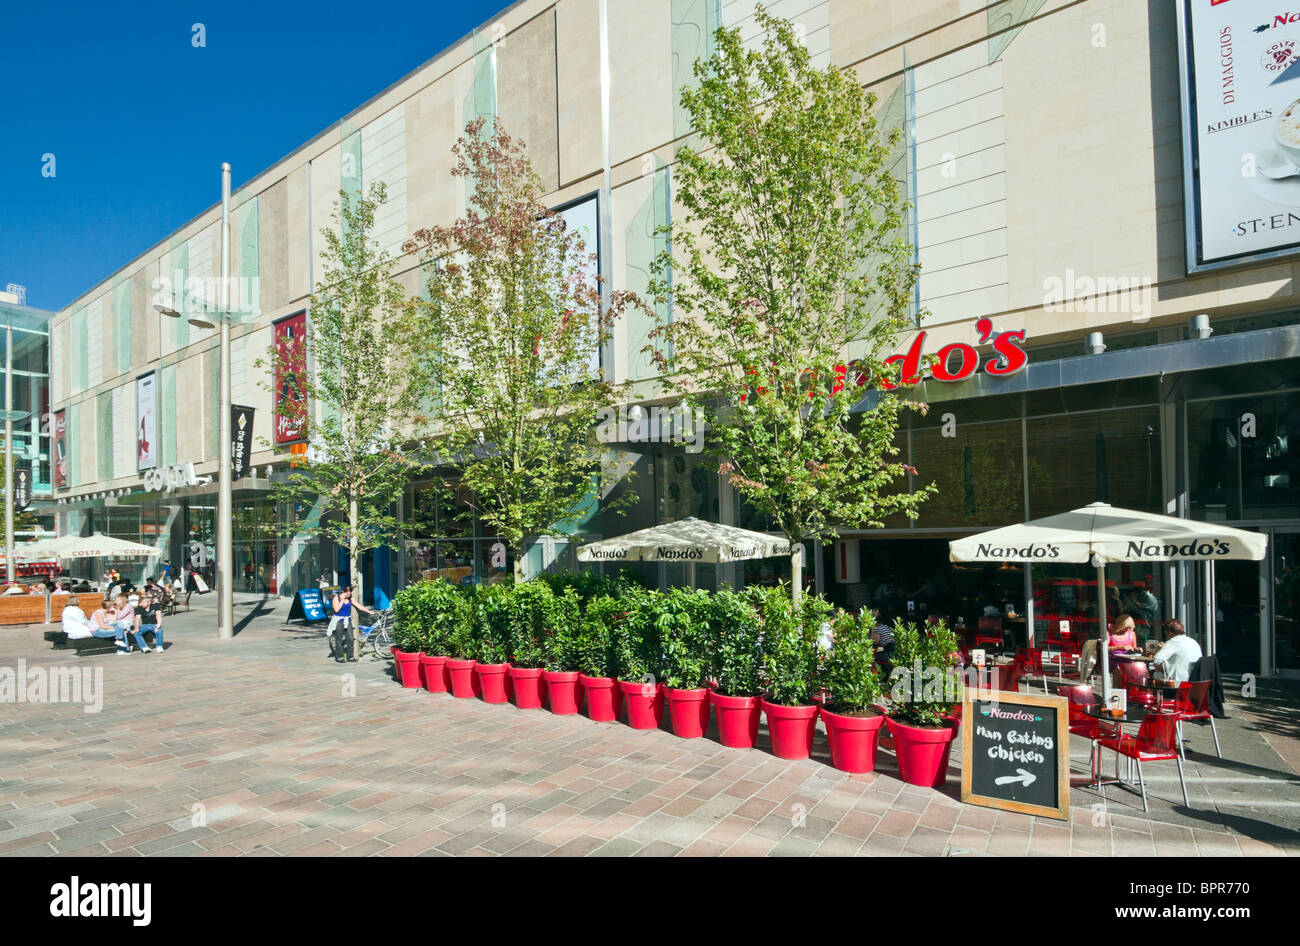 Cafe culture at West facade of rebuilt St. Enoch Centre in Glasgow Scotland Stock Photo